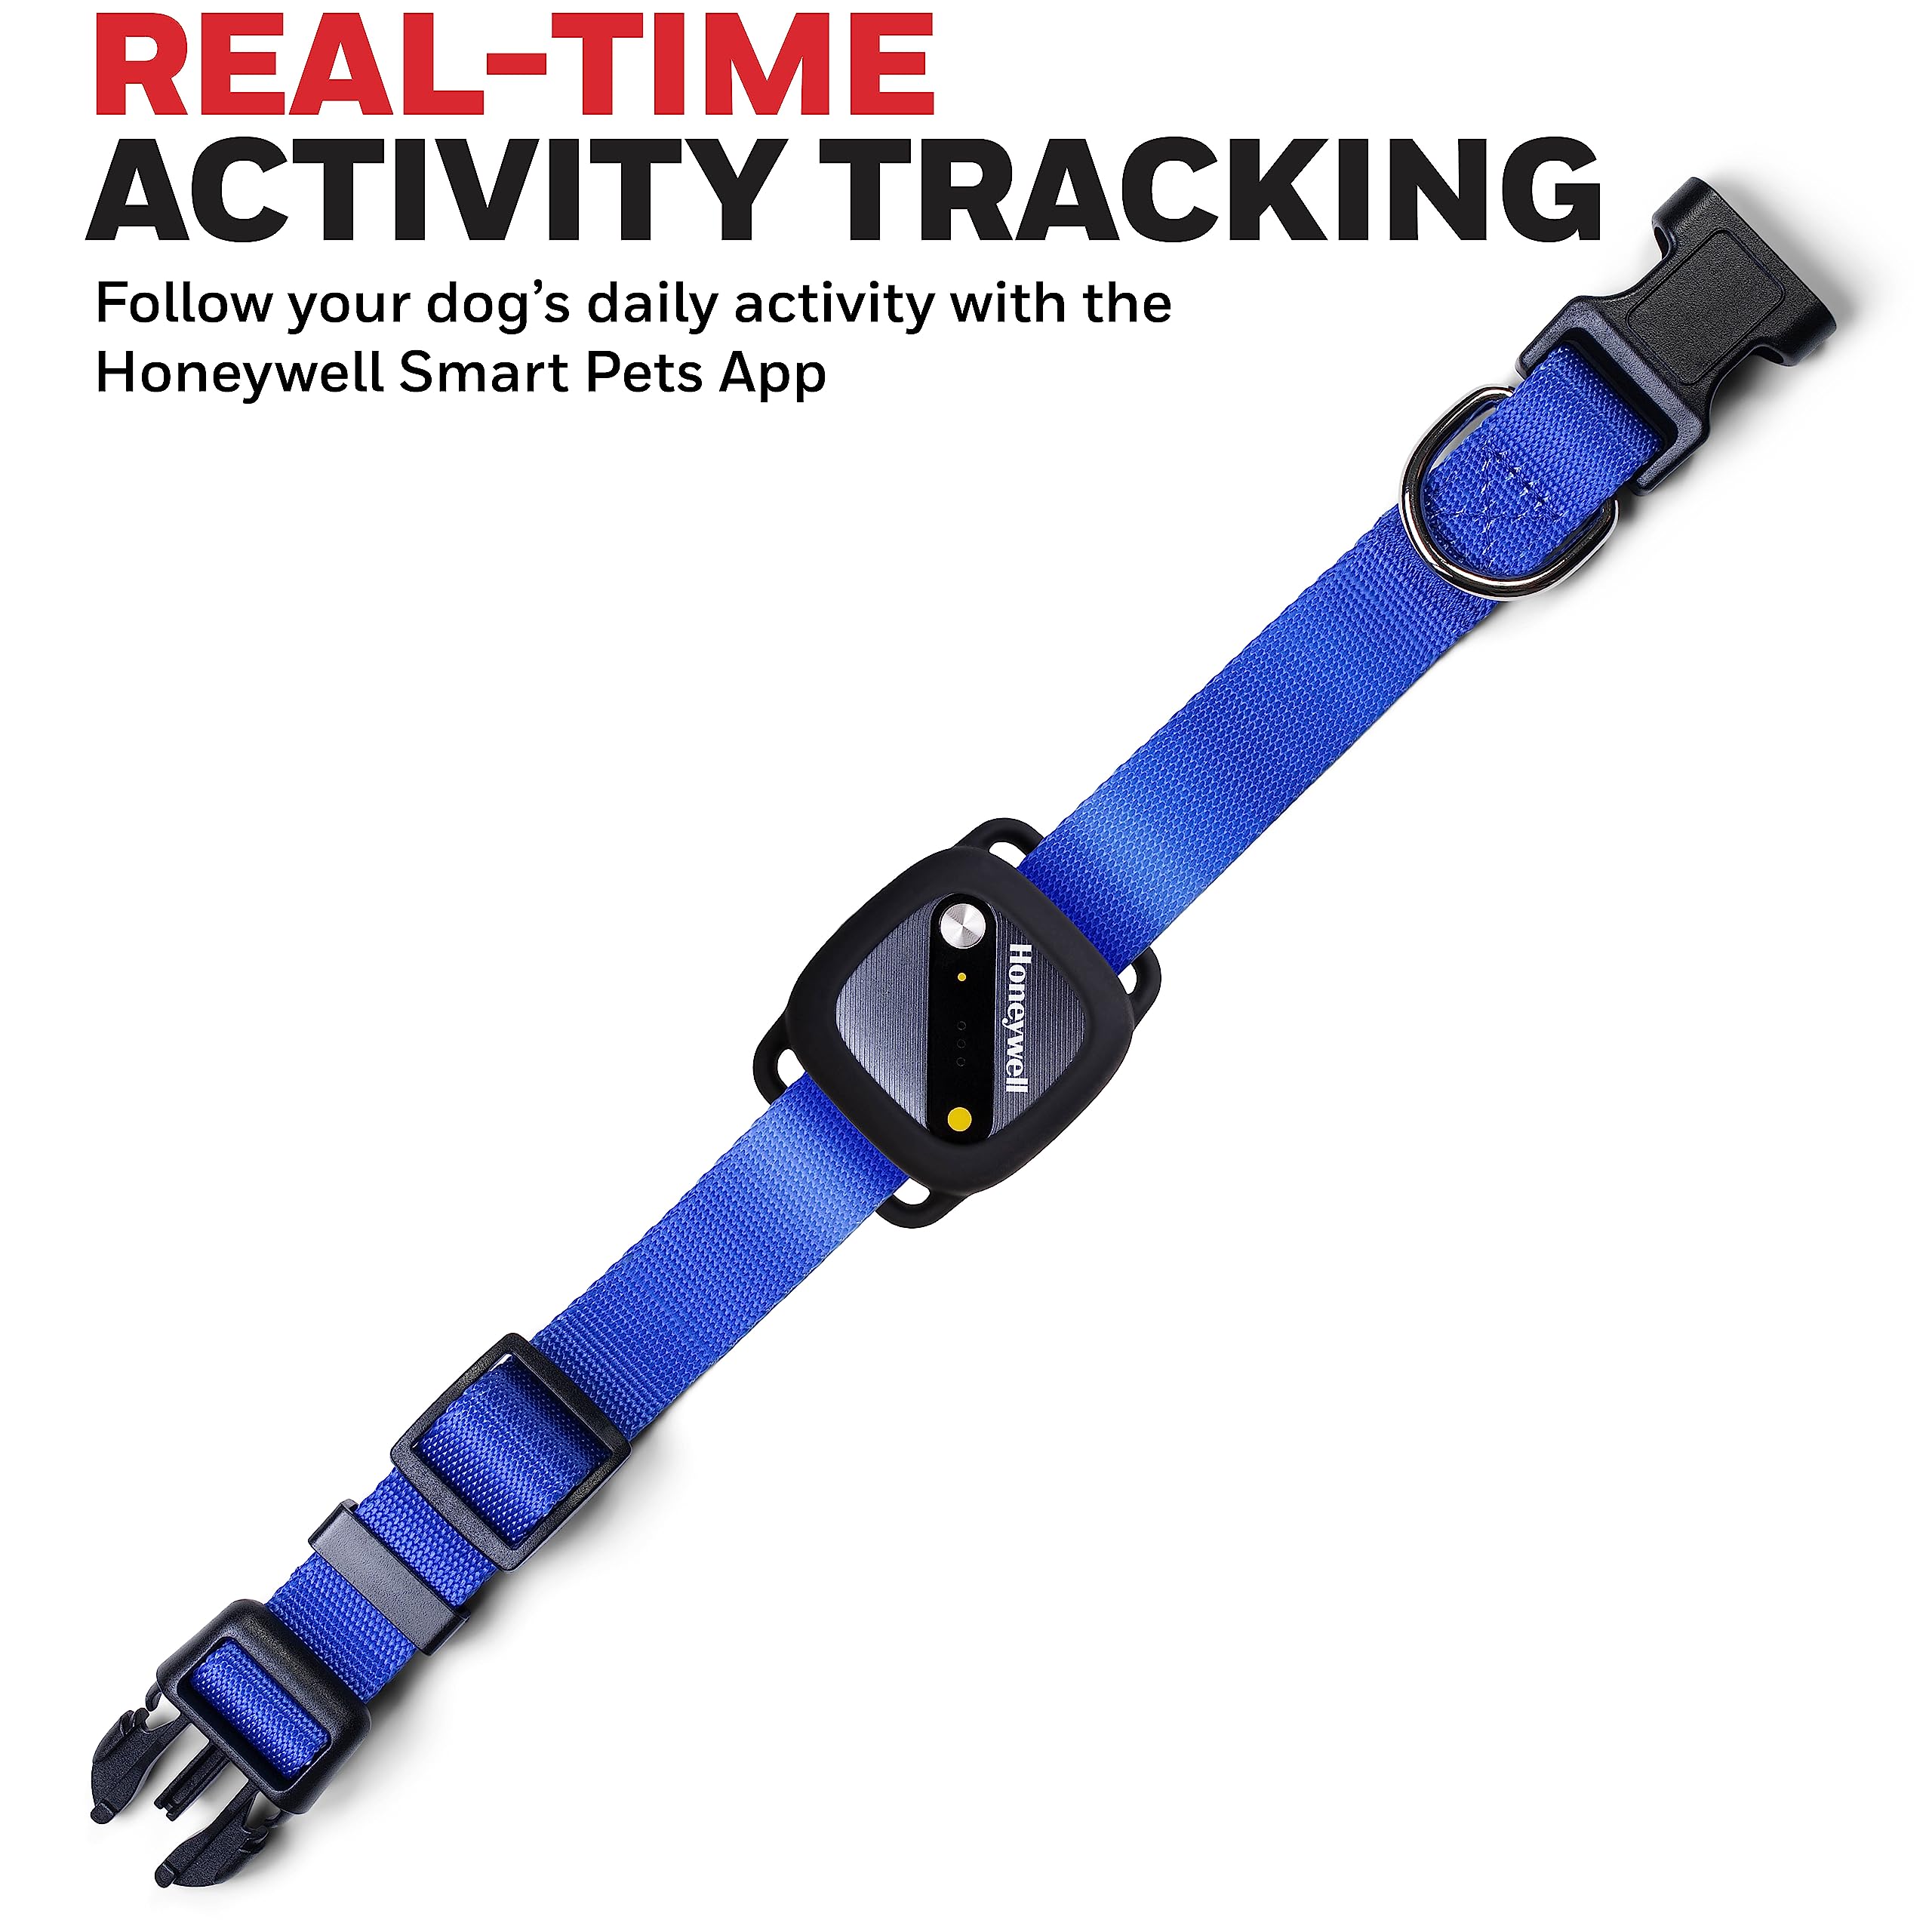 Honeywell Pet Activity Tracker with GPS for Dogs, Blue- Use Your Collar or Included One-Size-Fits-All Collar- Geo-Fencing, Find-My-Pet Alarm, and Review History- Perfect Dog Fitness Tracker